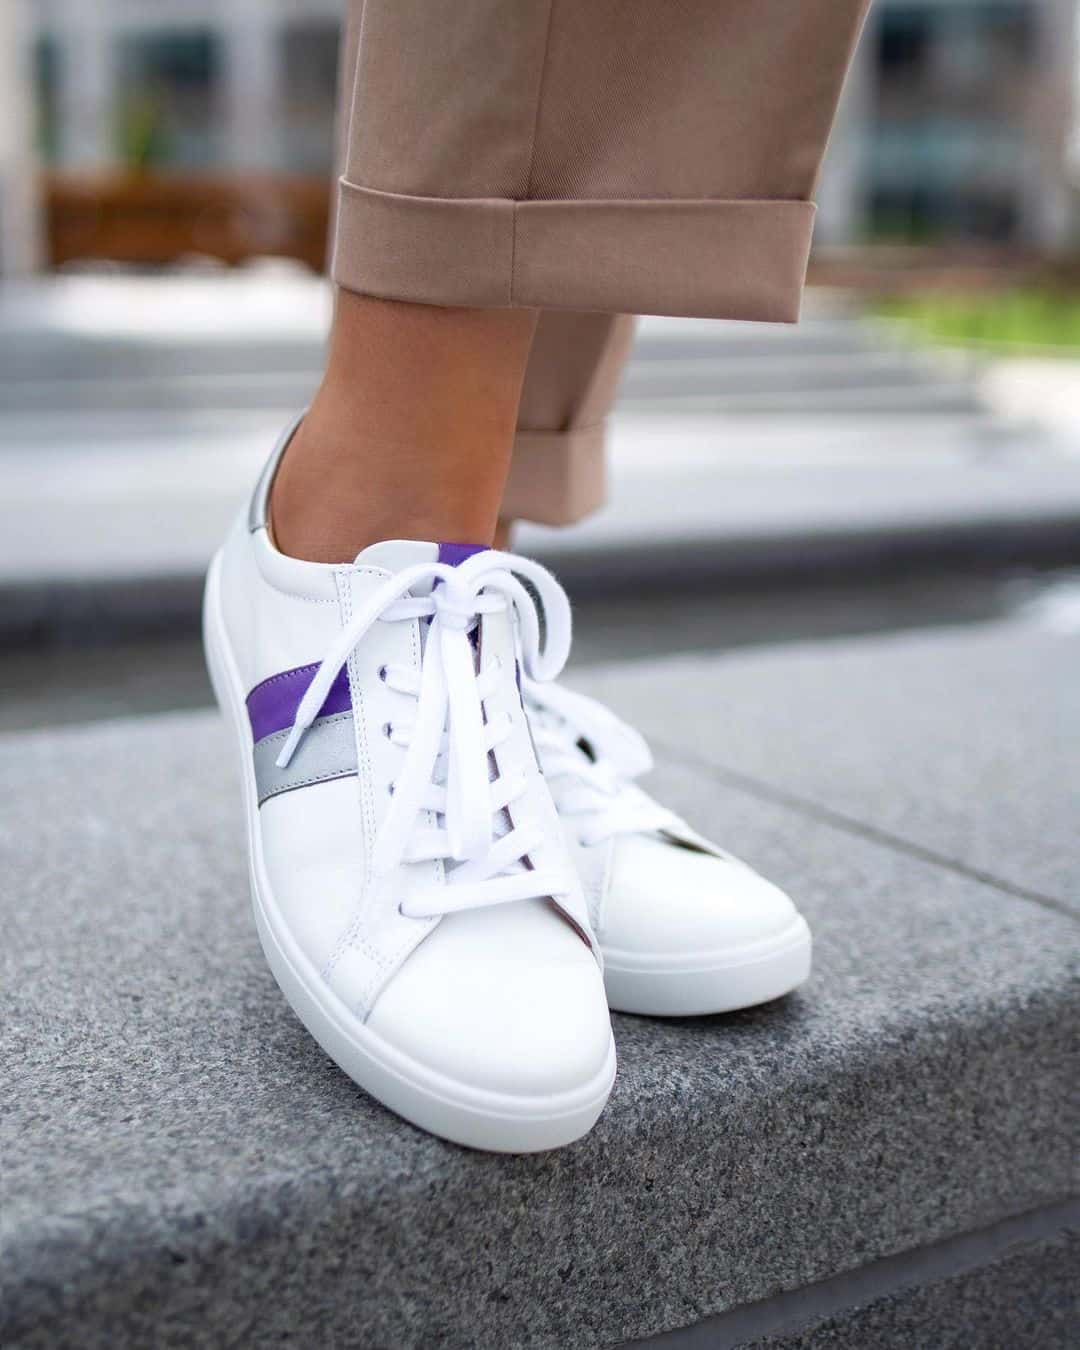 hotter shoes purple sneakers lifestyle